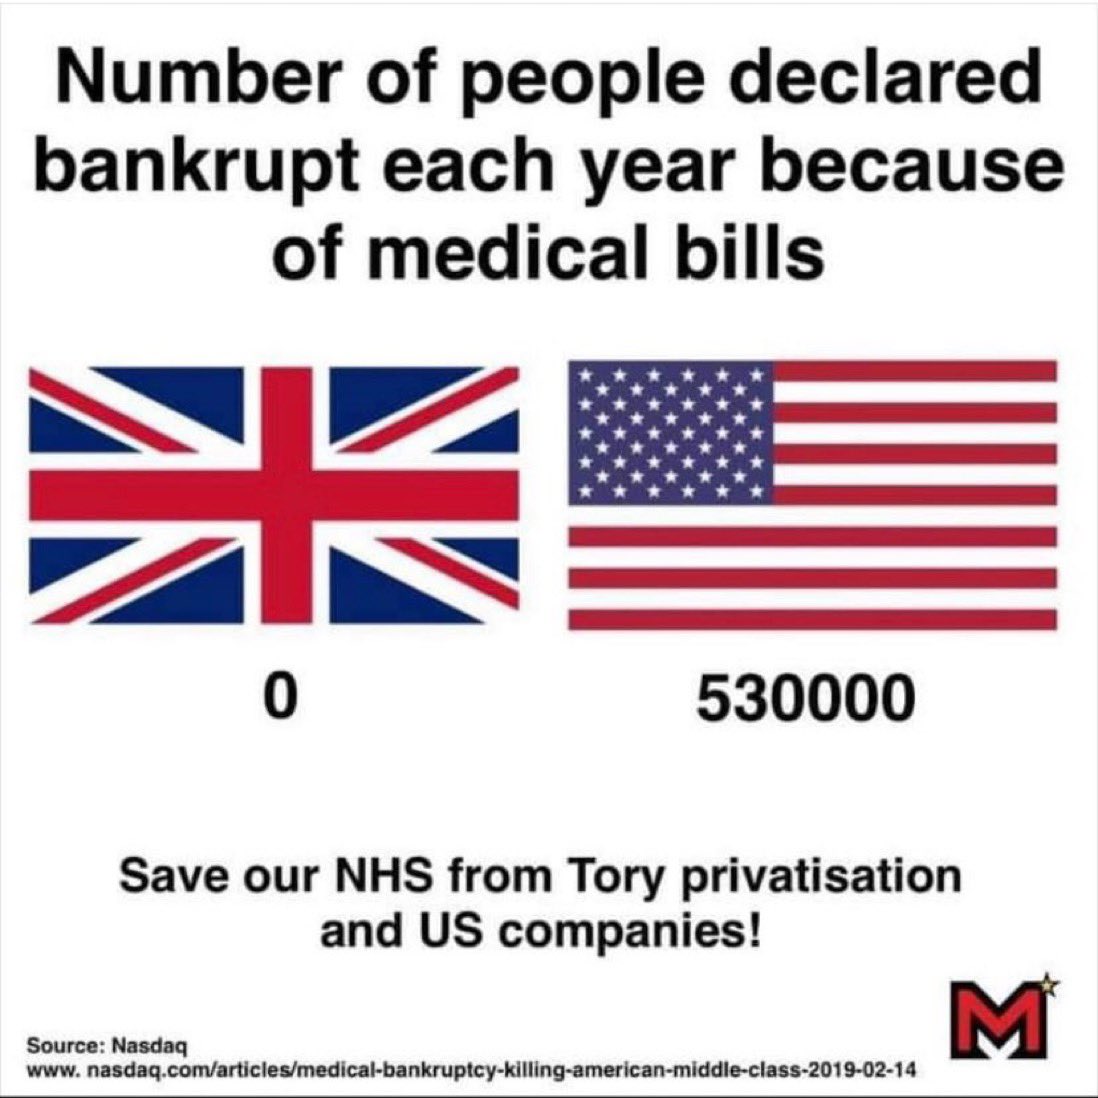 The NHS is by no means perfect, but no one in the UK has ever been declared bankrupt because of medical bills. Yet. We must never take our NHS for granted.